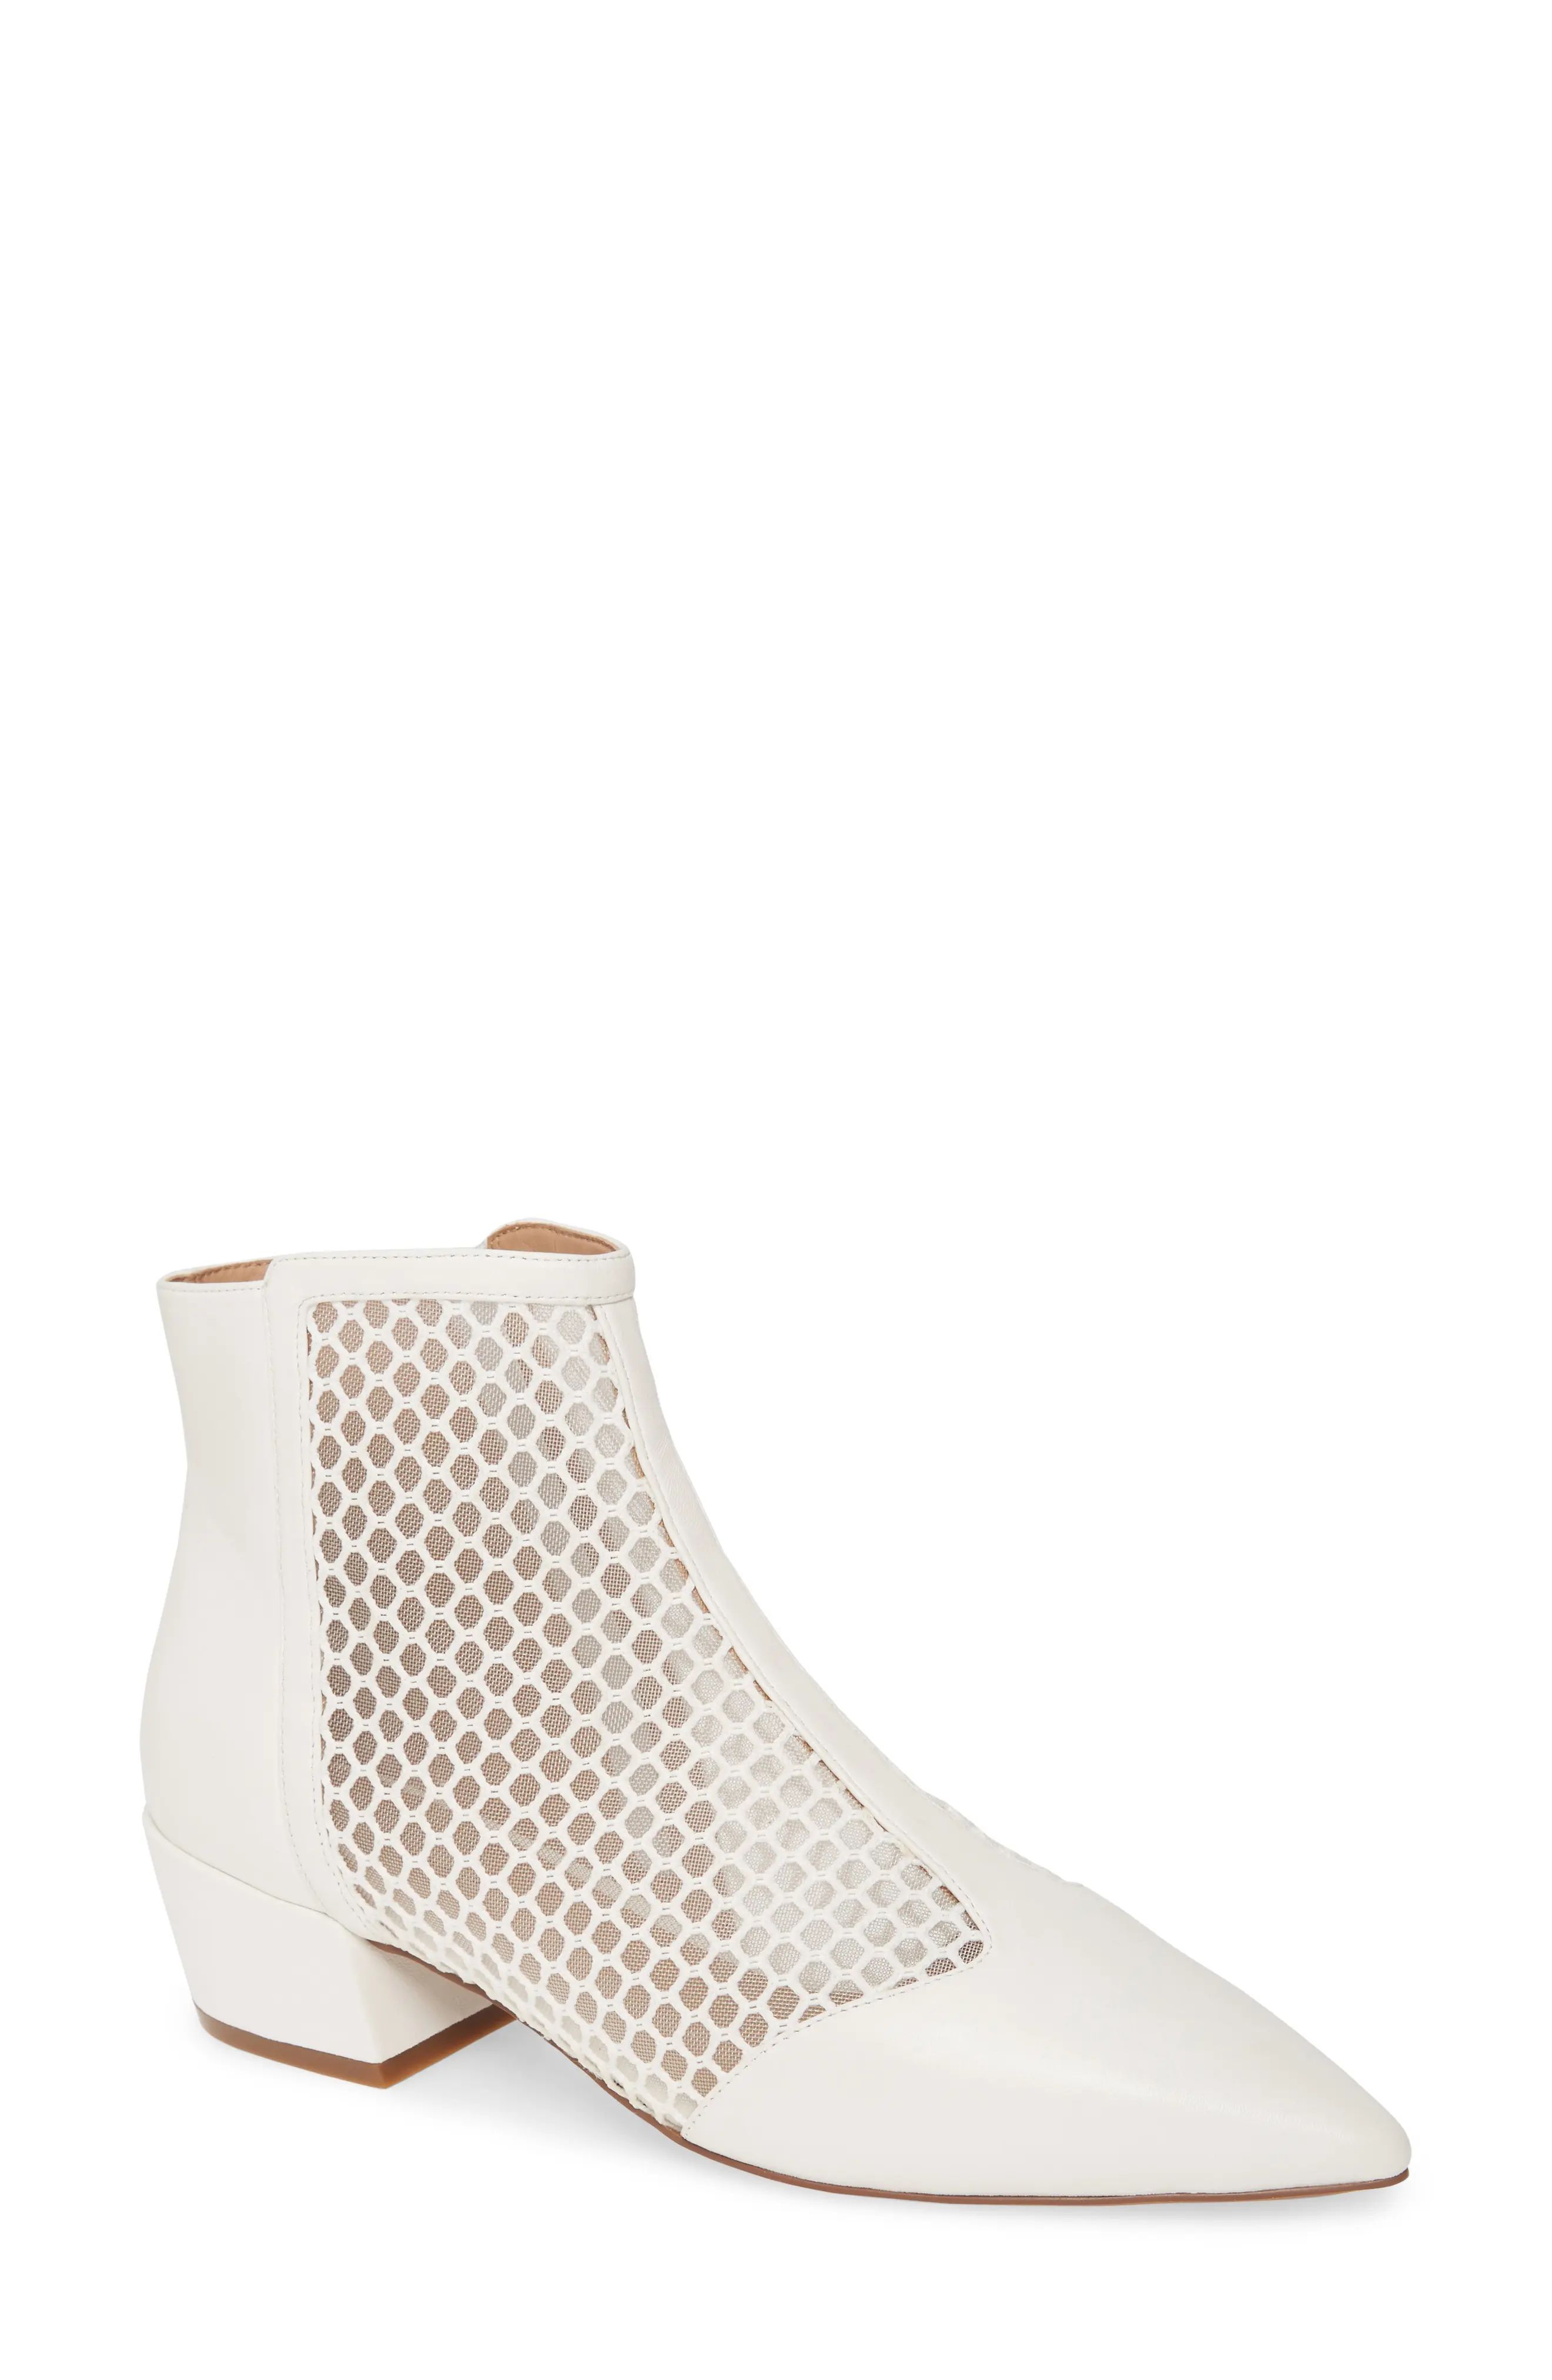 Linea Paolo Vida Bootie, Size 5 in White Nappa Leather at Nordstrom | Nordstrom